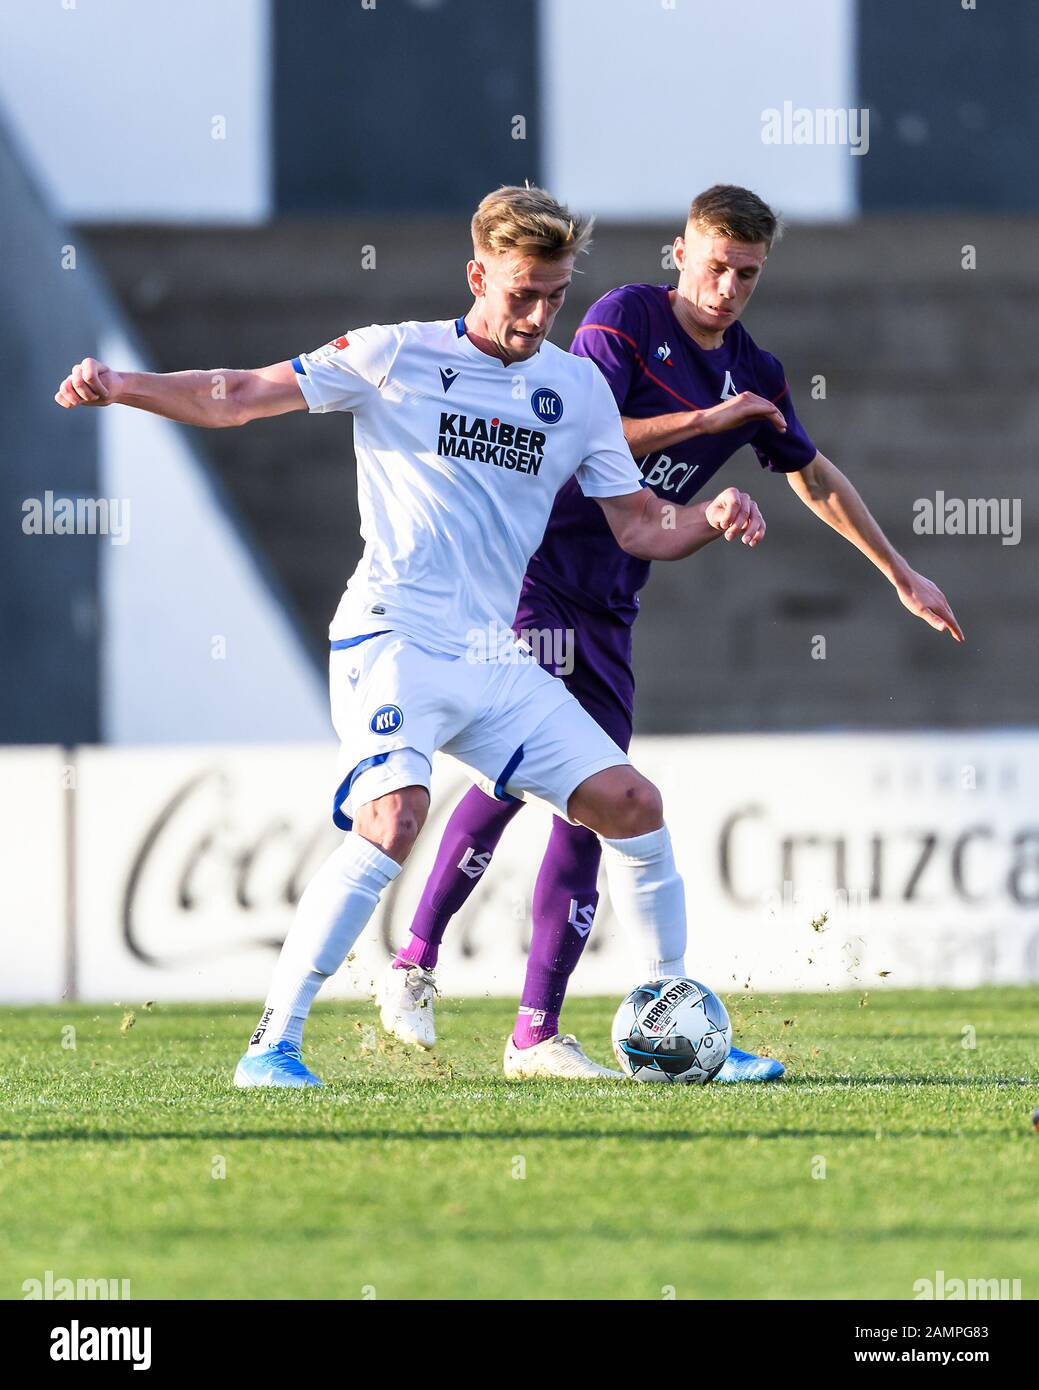 Alexander Groiss (KSC) in duels with Maxime Dominguez (FC Lausanne). GES/Football/2nd Bundesliga: Karlsruher SC - training camp, test game KSC - FC Lausanne-Sport, 14.01.2020 Football/Soccer: 2nd Bundesliga: KSC training camp, test match KSC - FC Lausanne-Sport, Karlsruhe, January 14, 2020 | usage worldwide Stock Photo